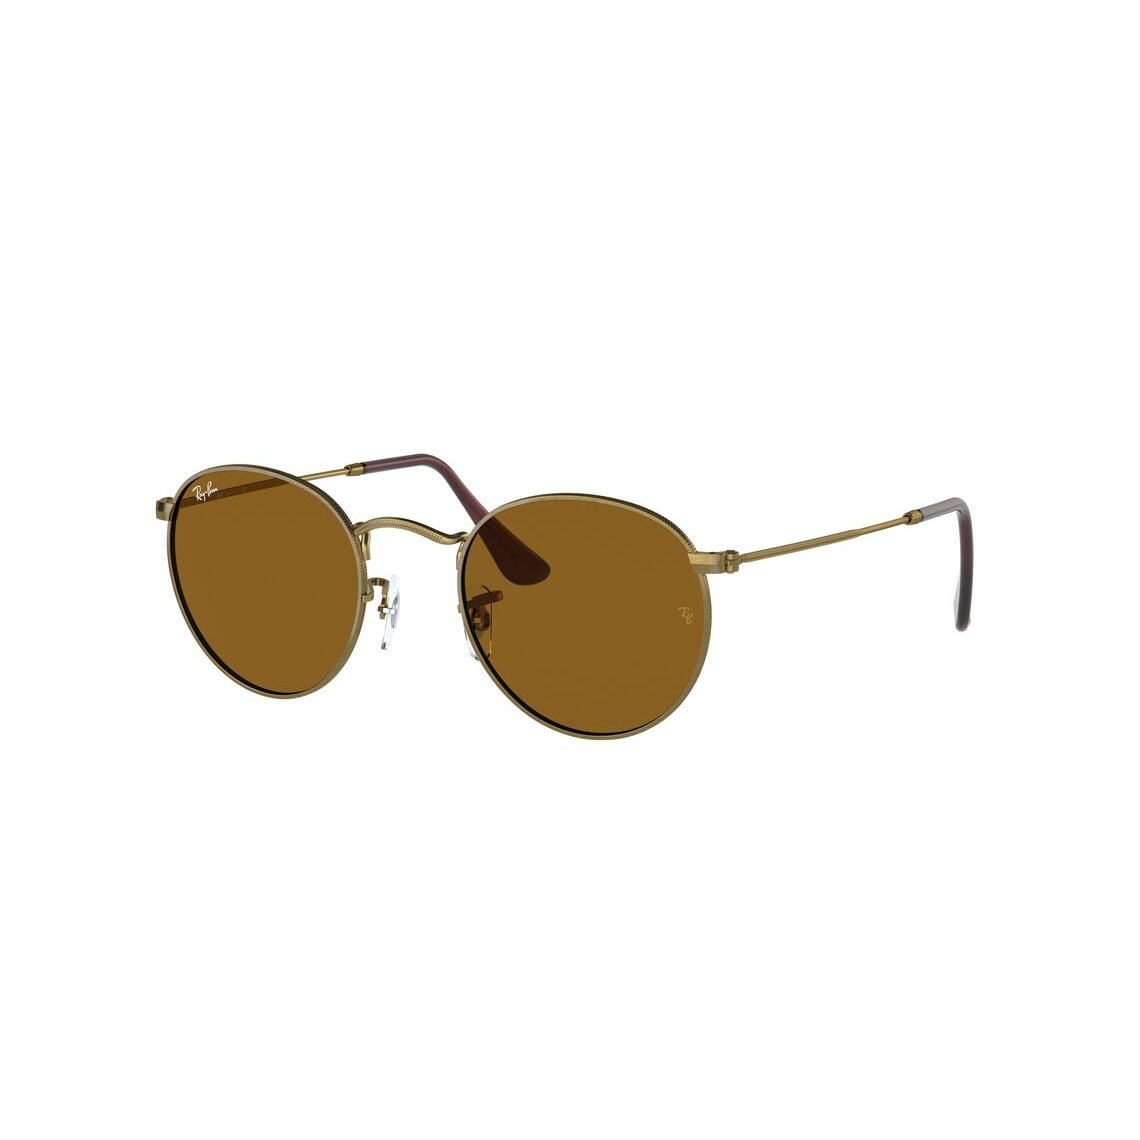 Ray-Ban Round Metal RB3447 922833 4721